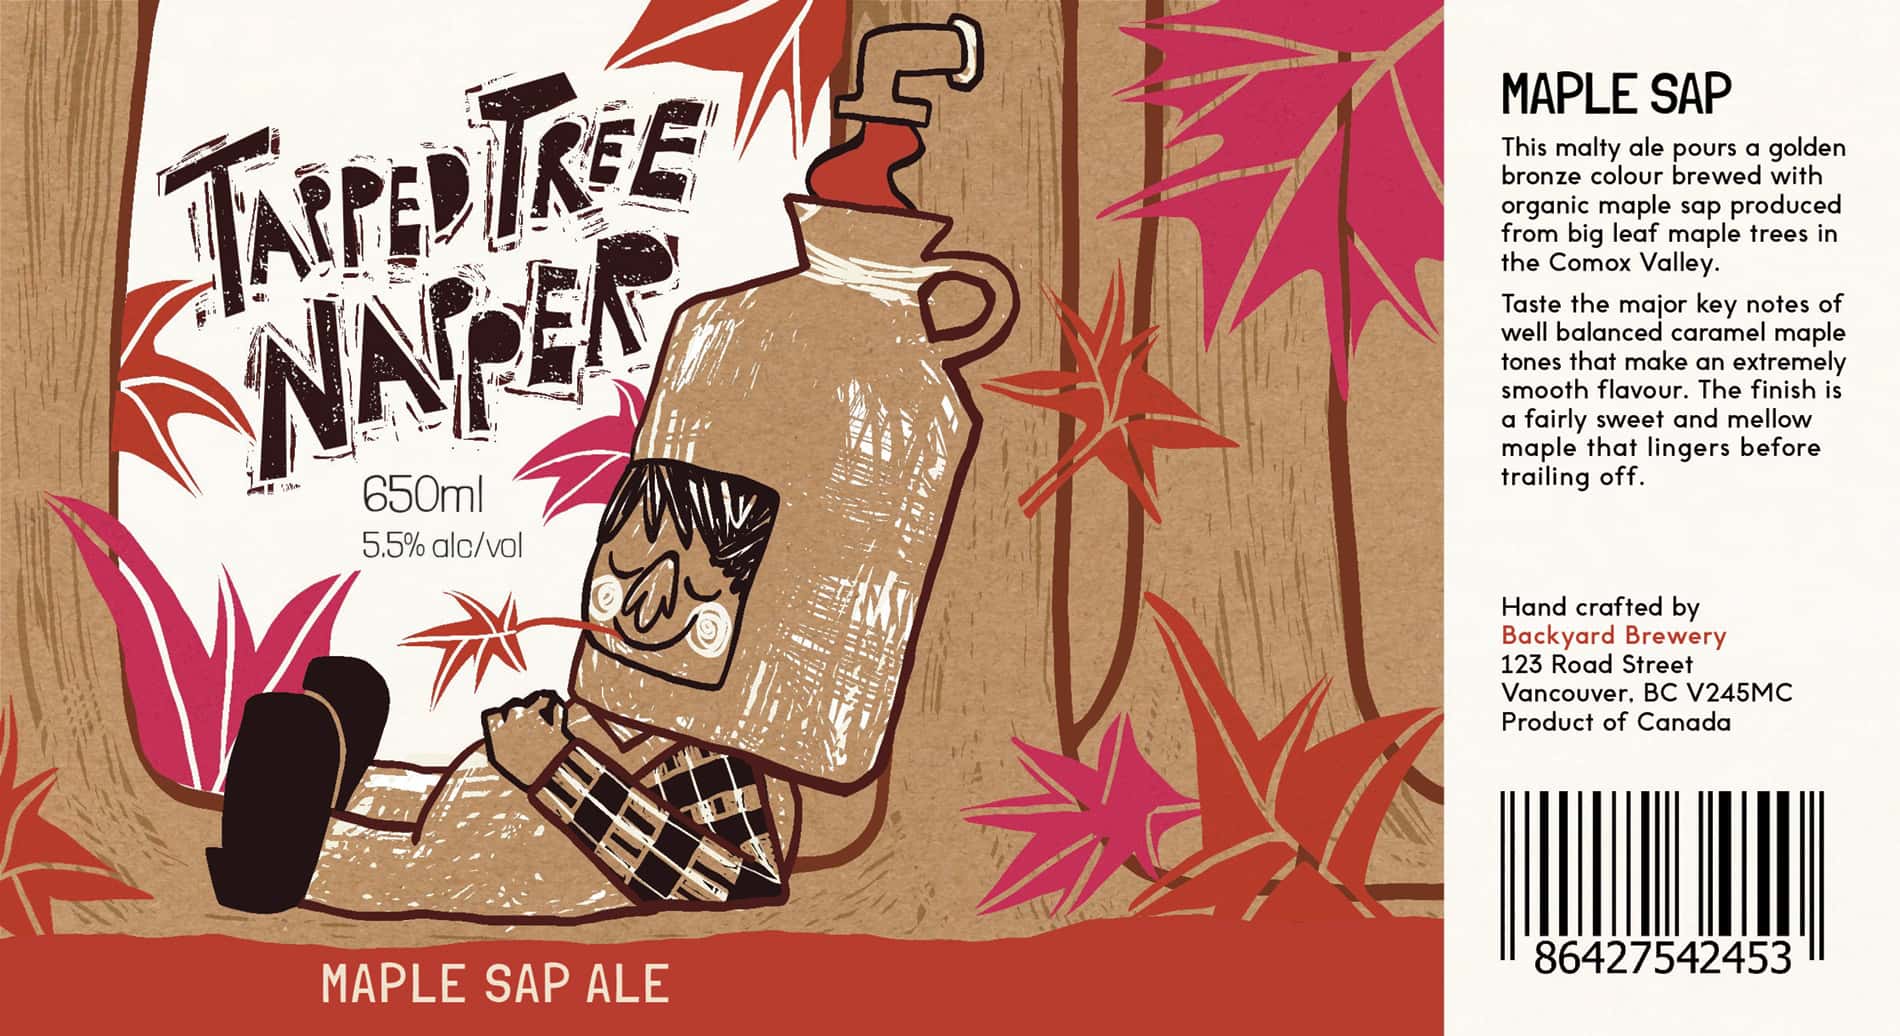 Backyard brewery maple sap ale label design with an illustration of a farmer sleeping against a maple tree